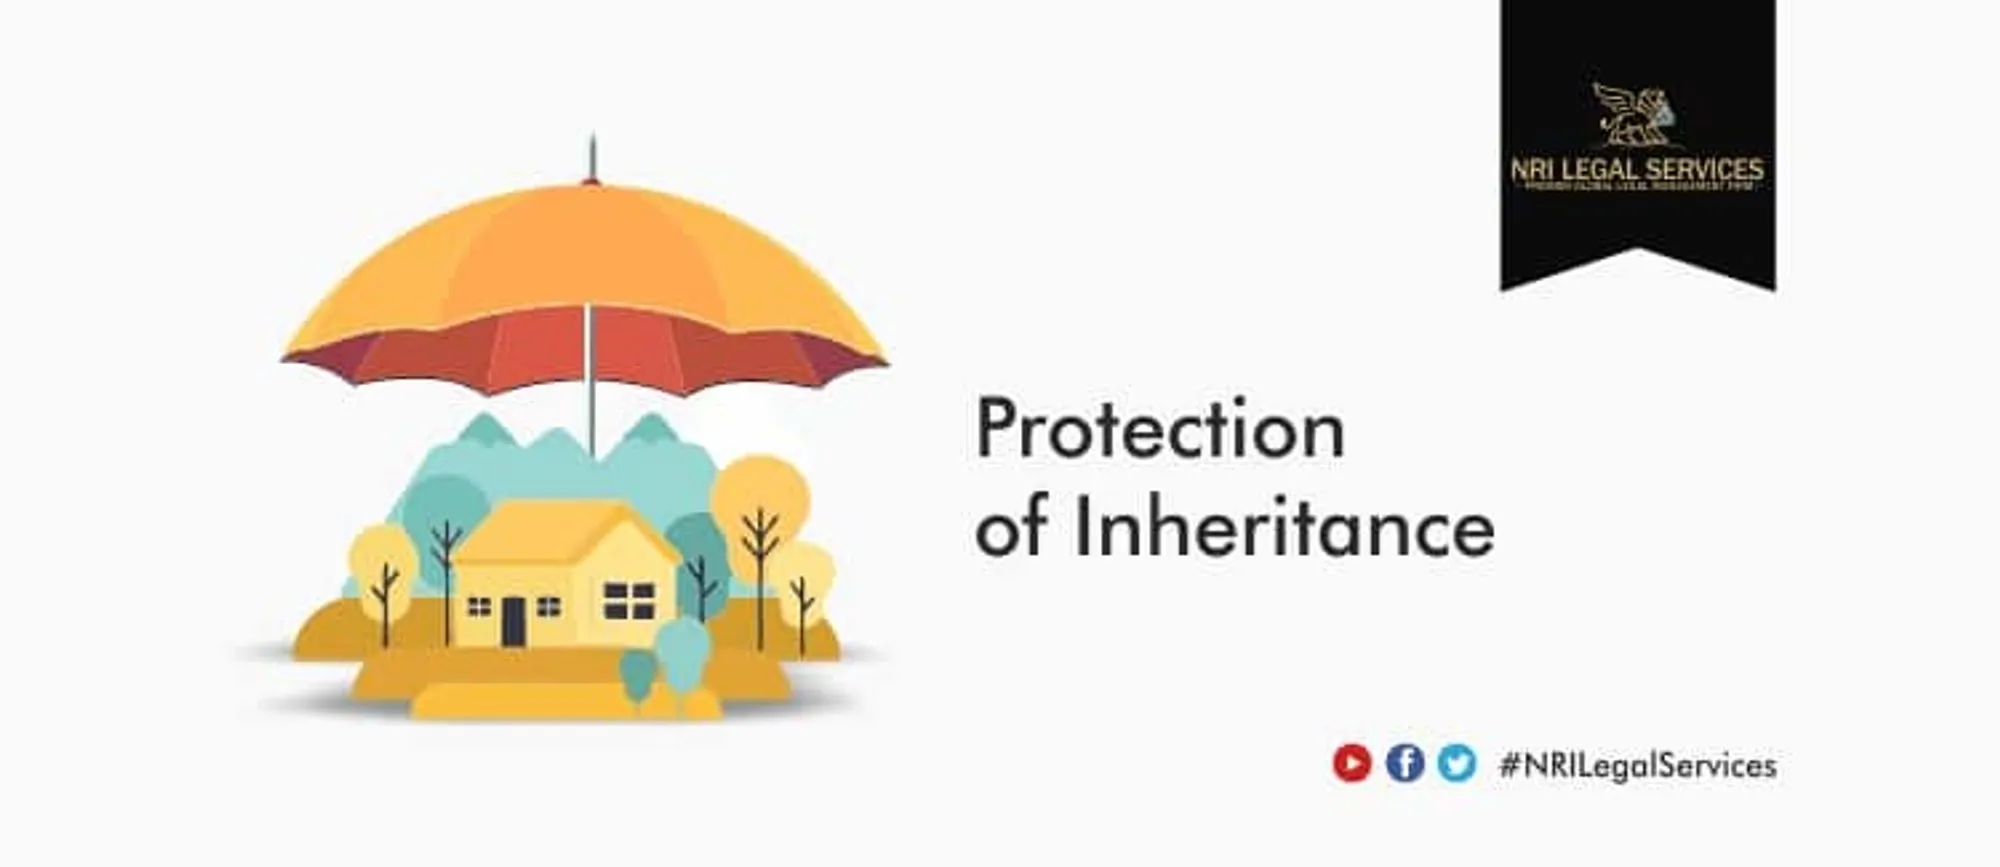 Protection-of-inheritance-rights-of-women-and-varying-succession-laws